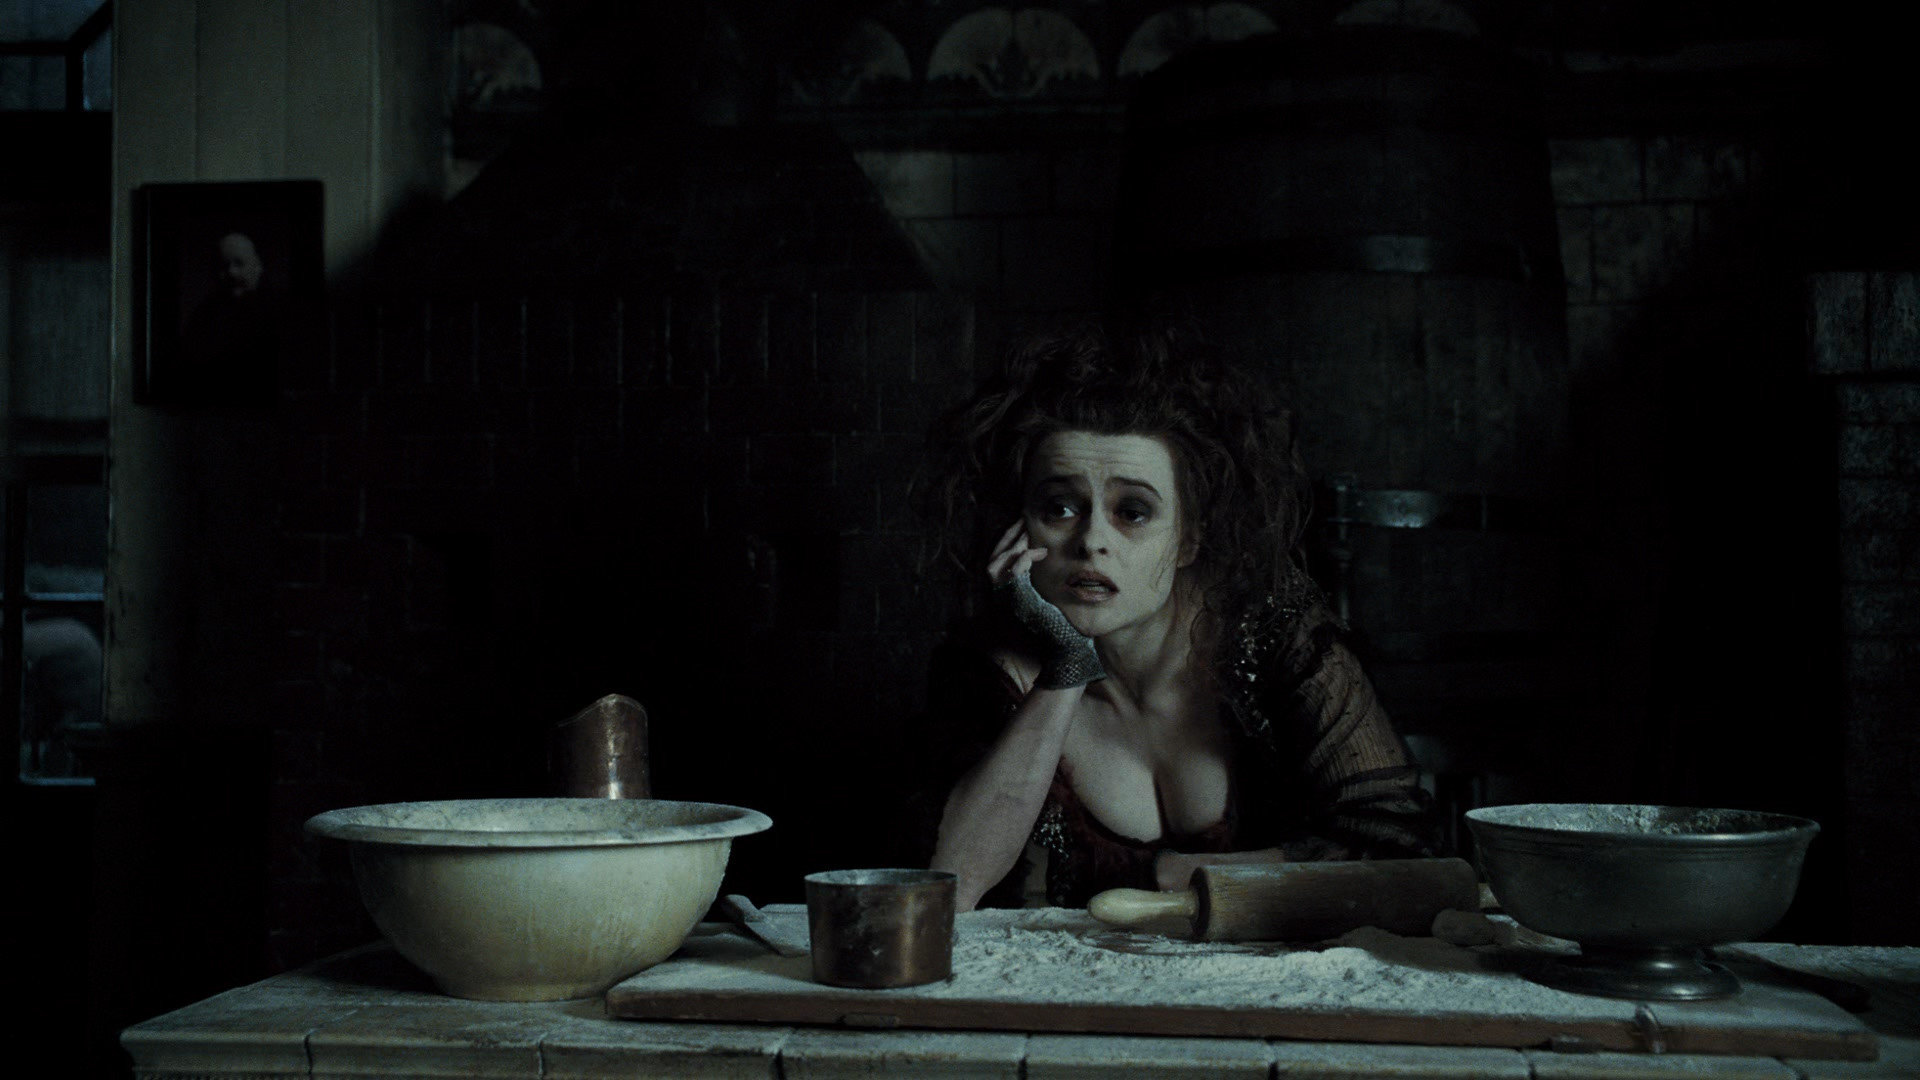 Sweeny Todd Wallpapers